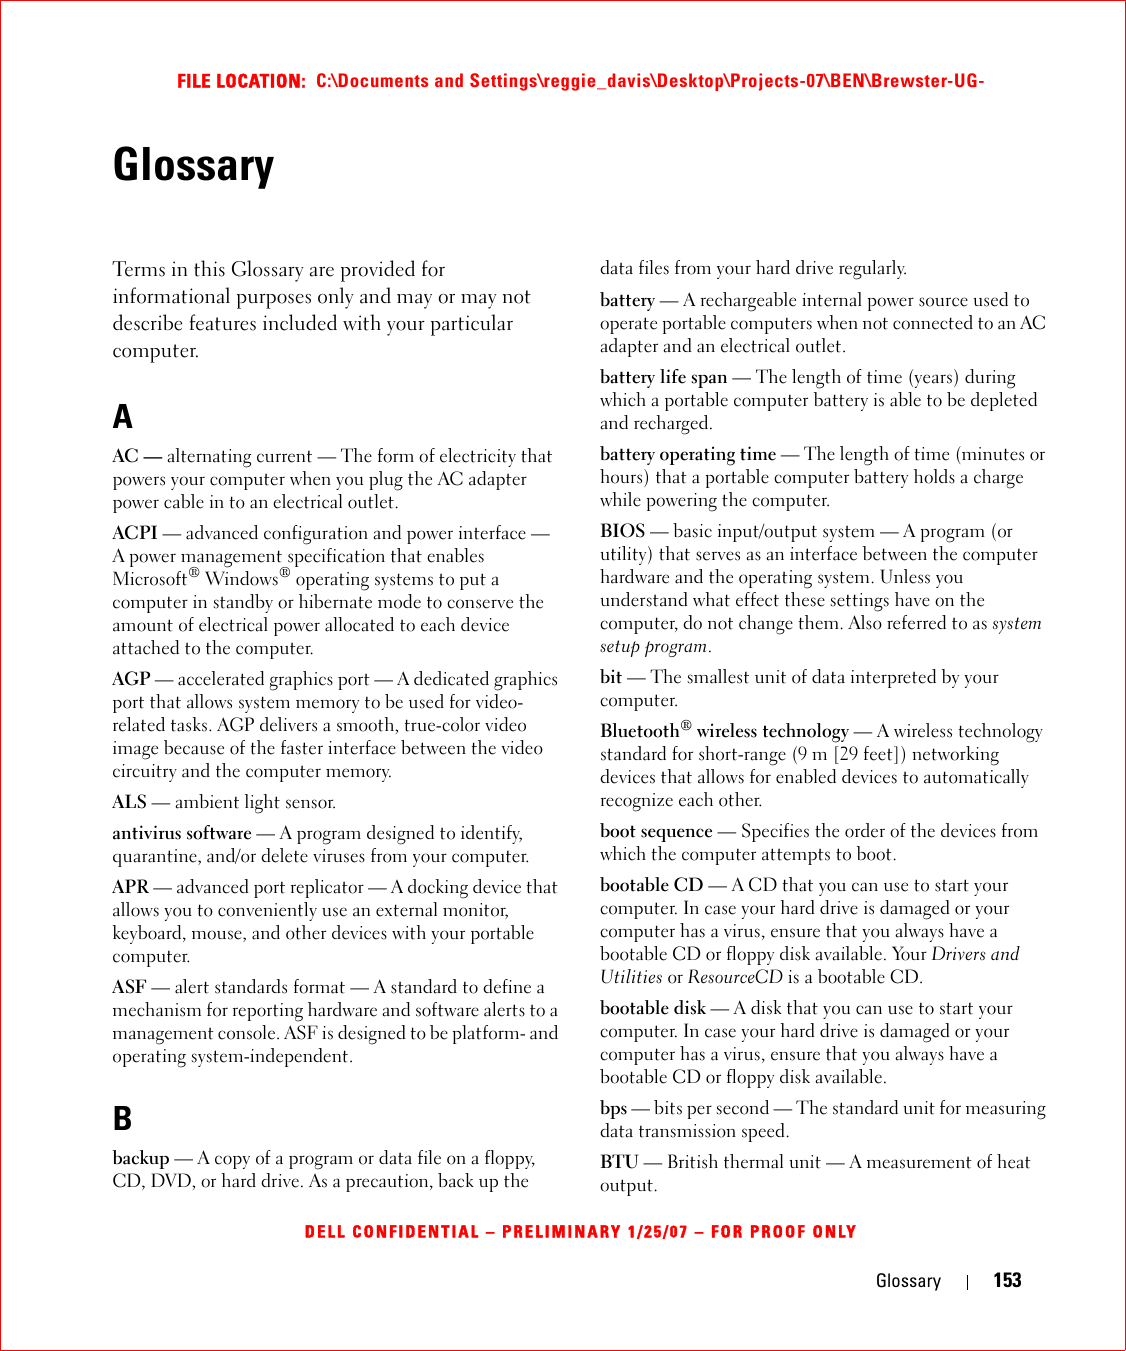 Glossary 153FILE LOCATION:  C:\Documents and Settings\reggie_davis\Desktop\Projects-07\BEN\Brewster-UG-DELL CONFIDENTIAL – PRELIMINARY 1/25/07 – FOR PROOF ONLYGlossaryTerms in this Glossary are provided for informational purposes only and may or may not describe features included with your particular computer.AAC — alternating current — The form of electricity that powers your computer when you plug the AC adapter power cable in to an electrical outlet.ACPI — advanced configuration and power interface — A power management specification that enables Microsoft® Windows® operating systems to put a computer in standby or hibernate mode to conserve the amount of electrical power allocated to each device attached to the computer.AGP — accelerated graphics port — A dedicated graphics port that allows system memory to be used for video-related tasks. AGP delivers a smooth, true-color video image because of the faster interface between the video circuitry and the computer memory.ALS — ambient light sensor.antivirus software — A program designed to identify, quarantine, and/or delete viruses from your computer.APR — advanced port replicator — A docking device that allows you to conveniently use an external monitor, keyboard, mouse, and other devices with your portable computer.ASF — alert standards format — A standard to define a mechanism for reporting hardware and software alerts to a management console. ASF is designed to be platform- and operating system-independent.Bbackup — A copy of a program or data file on a floppy, CD, DVD, or hard drive. As a precaution, back up the data files from your hard drive regularly.battery — A rechargeable internal power source used to operate portable computers when not connected to an AC adapter and an electrical outlet.battery life span — The length of time (years) during which a portable computer battery is able to be depleted and recharged.battery operating time — The length of time (minutes or hours) that a portable computer battery holds a charge while powering the computer.BIOS — basic input/output system — A program (or utility) that serves as an interface between the computer hardware and the operating system. Unless you understand what effect these settings have on the computer, do not change them. Also referred to as system setup program.bit — The smallest unit of data interpreted by your computer.Bluetooth® wireless technology — A wireless technology standard for short-range (9 m [29 feet]) networking devices that allows for enabled devices to automatically recognize each other.boot sequence — Specifies the order of the devices from which the computer attempts to boot.bootable CD — A CD that you can use to start your computer. In case your hard drive is damaged or your computer has a virus, ensure that you always have a bootable CD or floppy disk available. Your Drivers and Utilities or ResourceCD is a bootable CD.bootable disk — A disk that you can use to start your computer. In case your hard drive is damaged or your computer has a virus, ensure that you always have a bootable CD or floppy disk available.bps — bits per second — The standard unit for measuring data transmission speed.BTU — British thermal unit — A measurement of heat output.